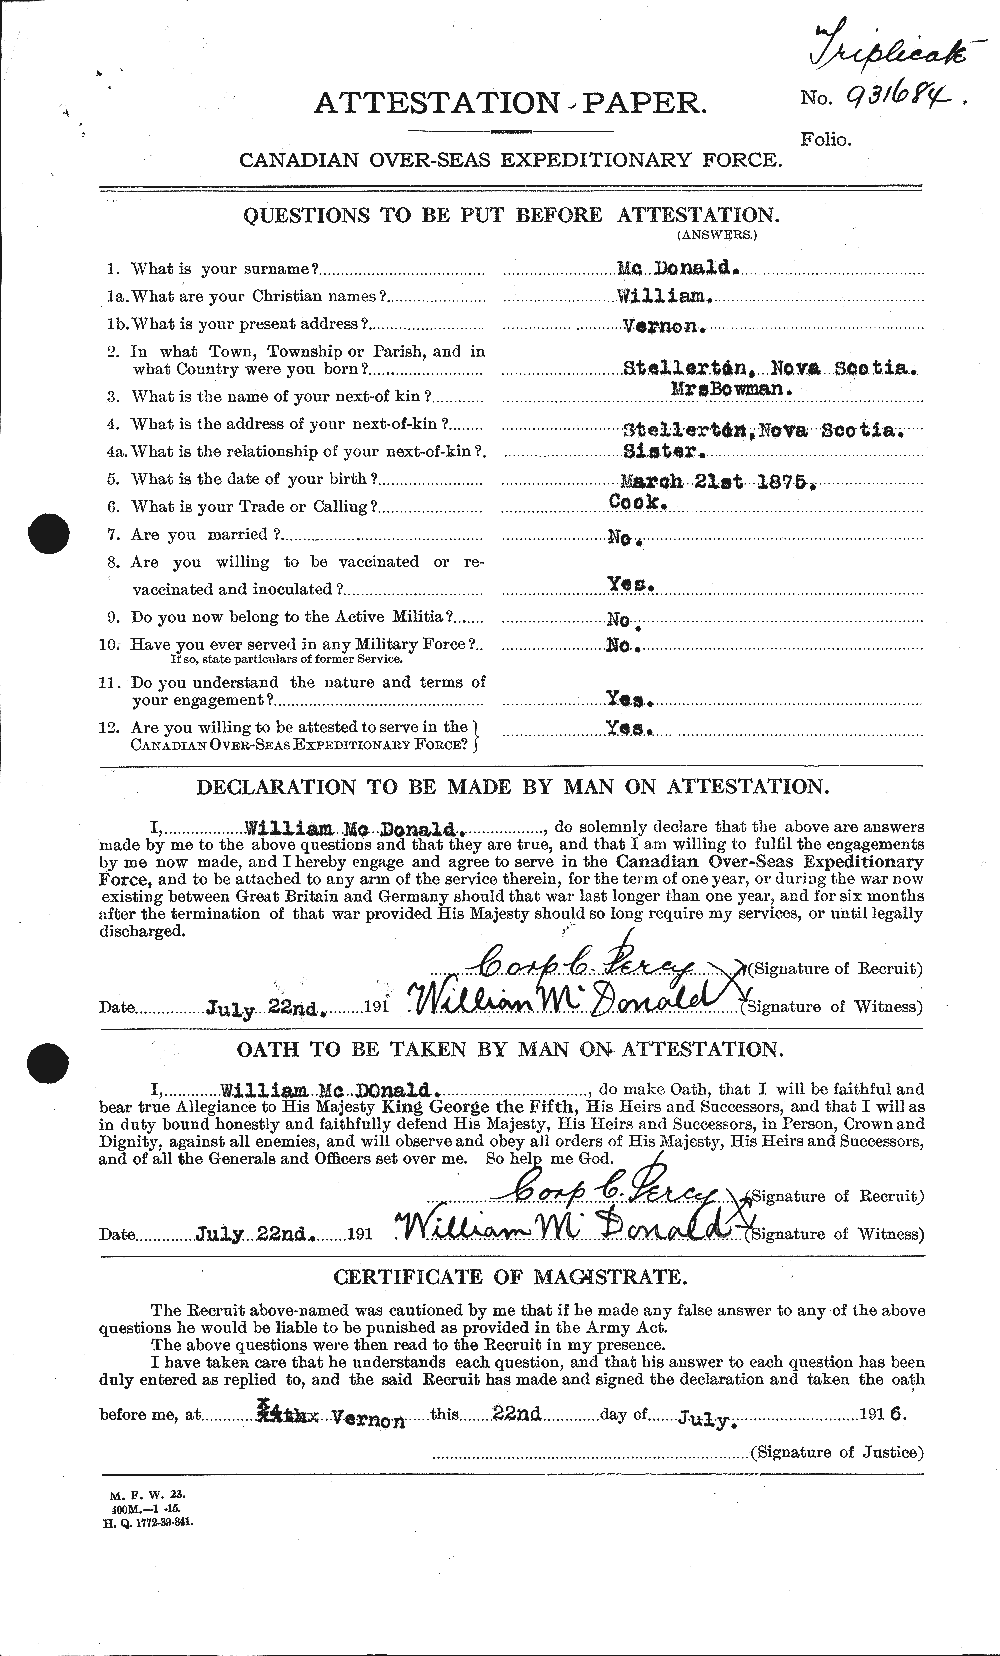 Personnel Records of the First World War - CEF 520051a